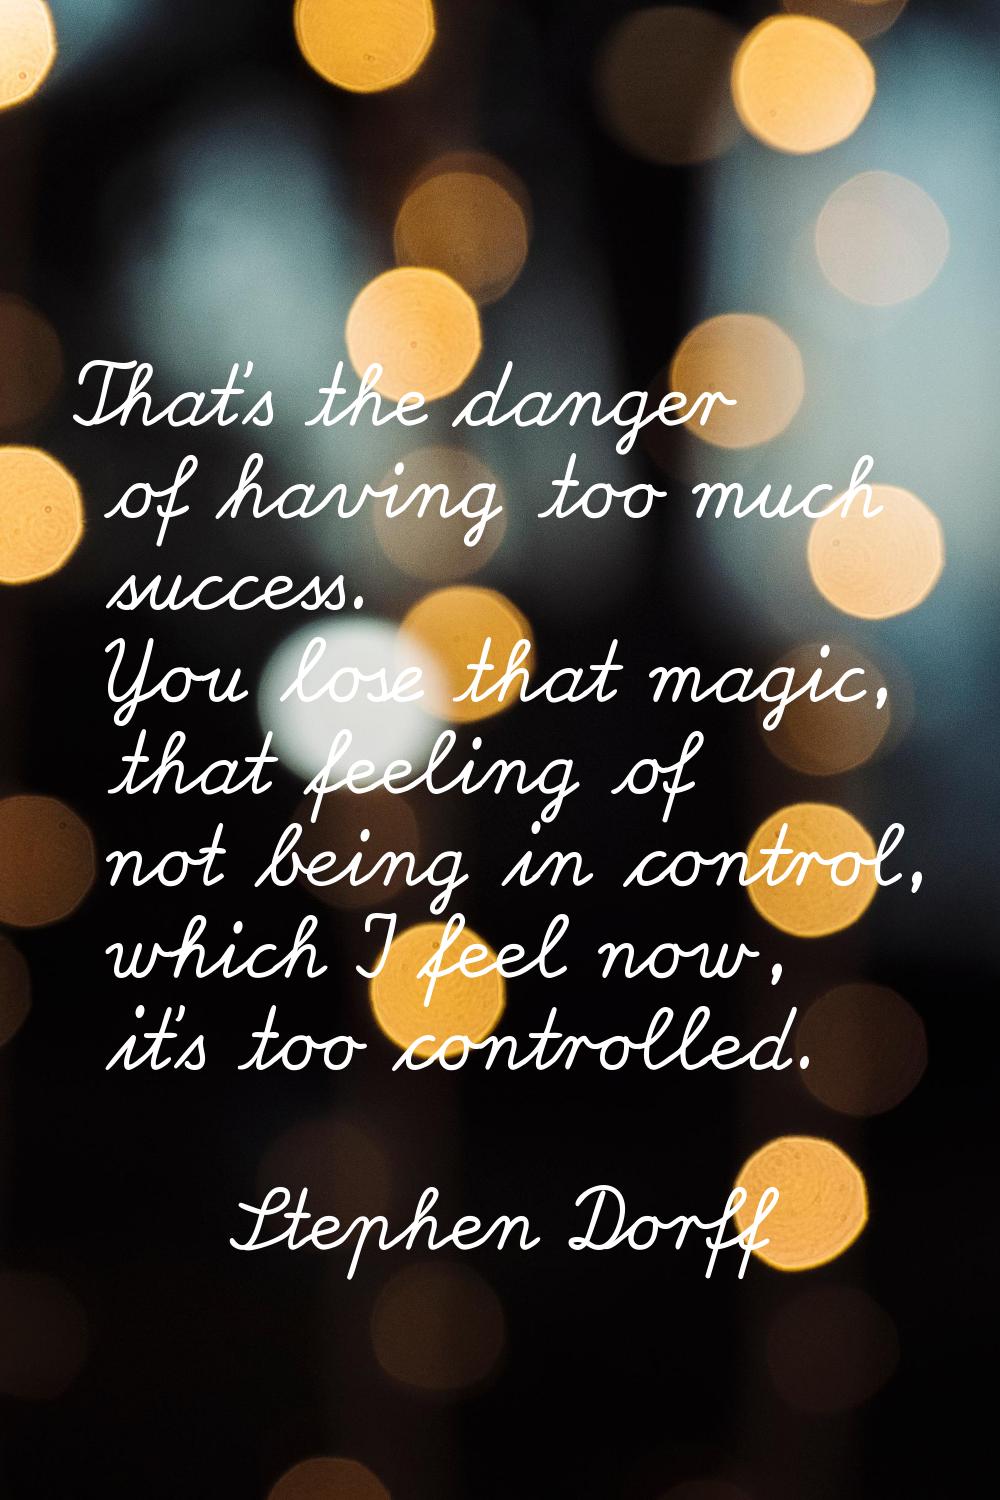 That's the danger of having too much success. You lose that magic, that feeling of not being in con